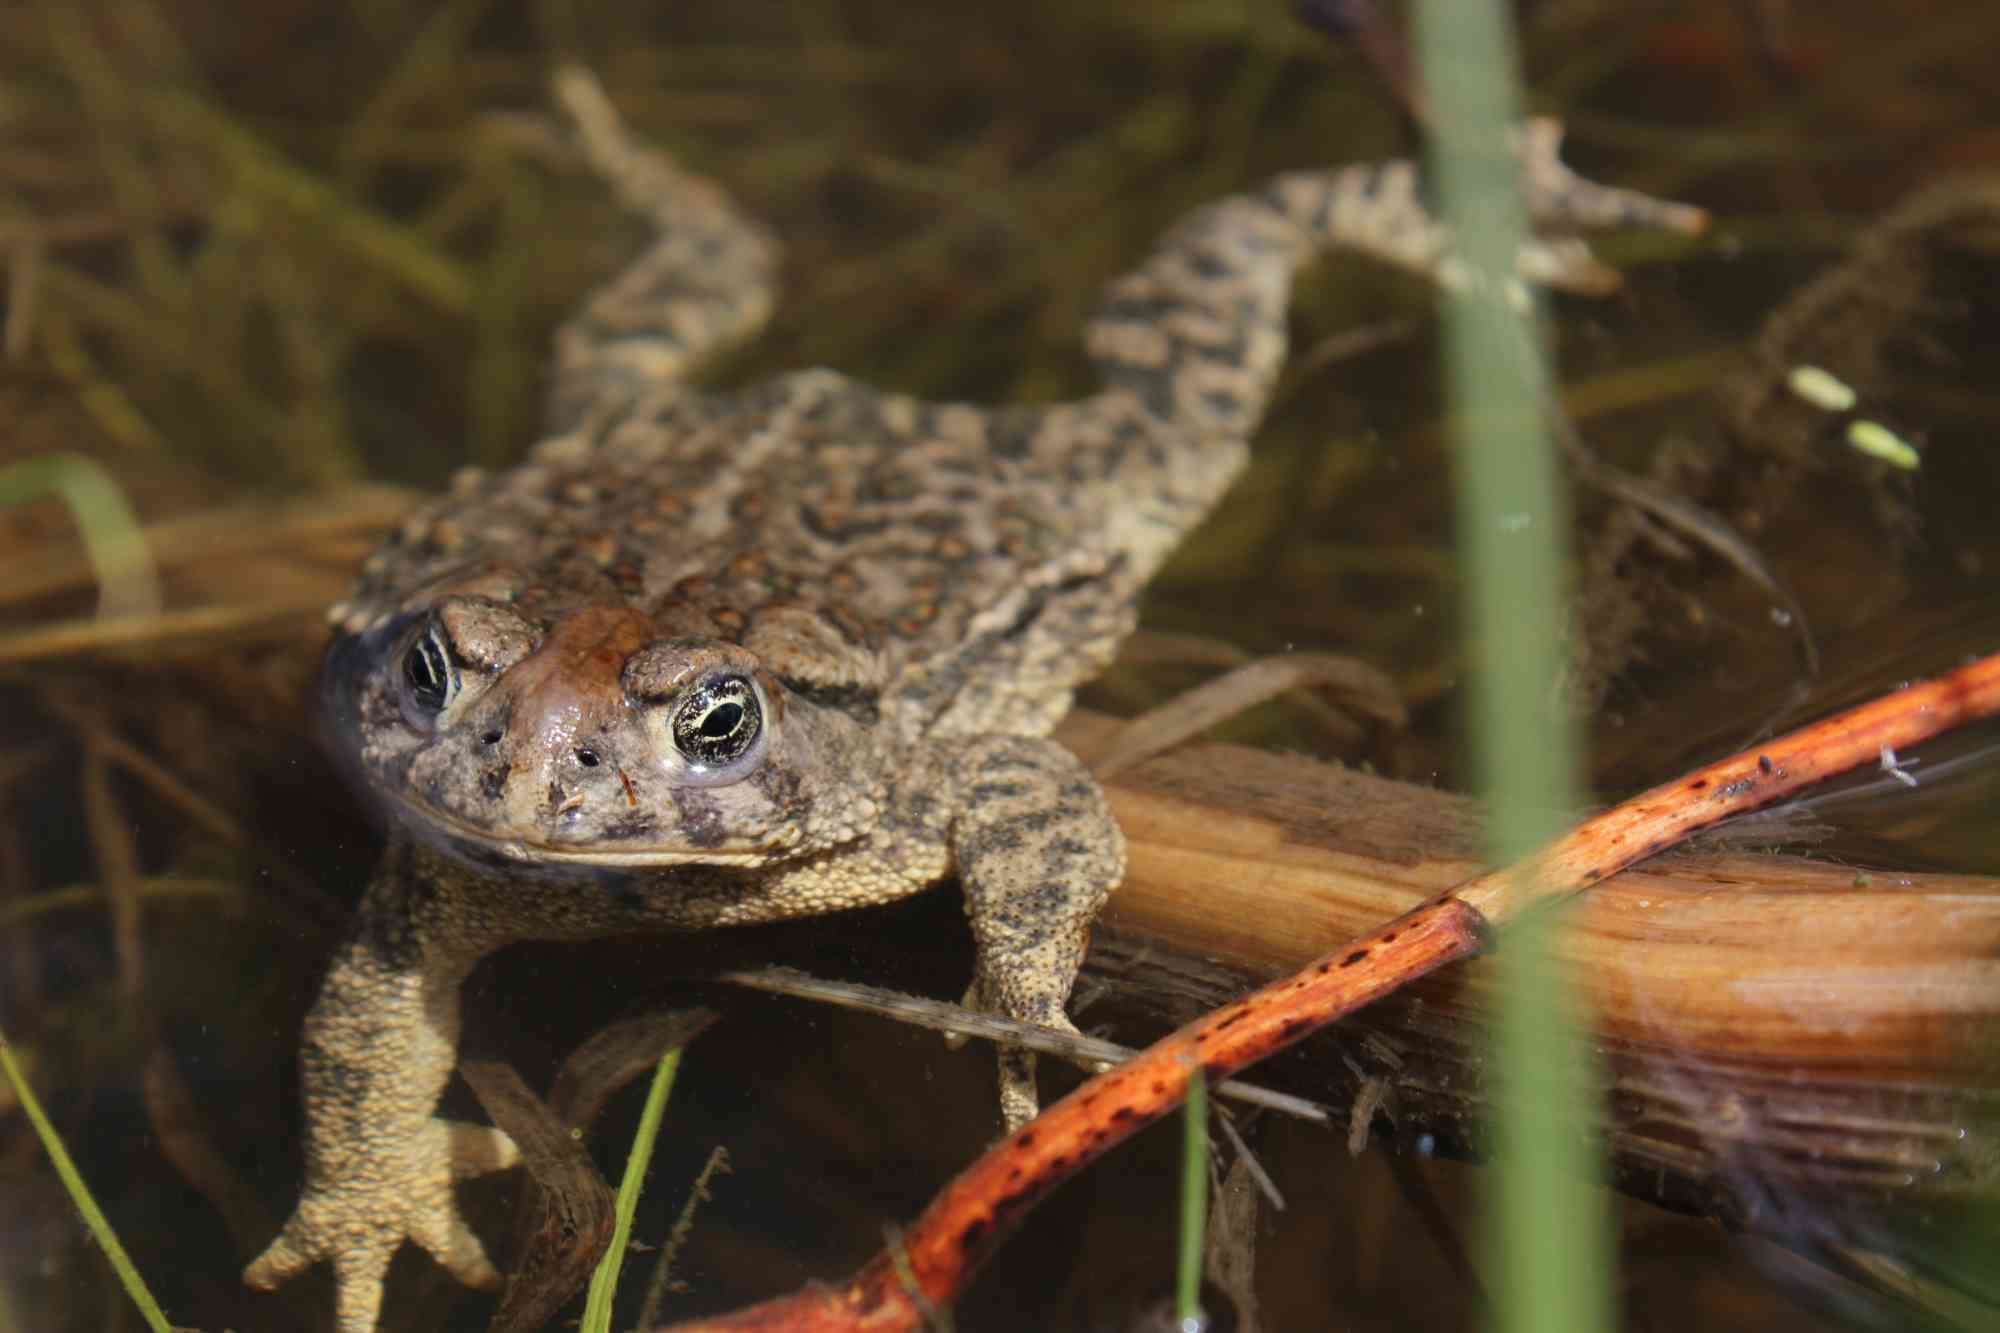 2018.05.30 - Wyoming Toad - Wyoming - Mindy Meade-USFWS (CC BY 2.0 DEED)